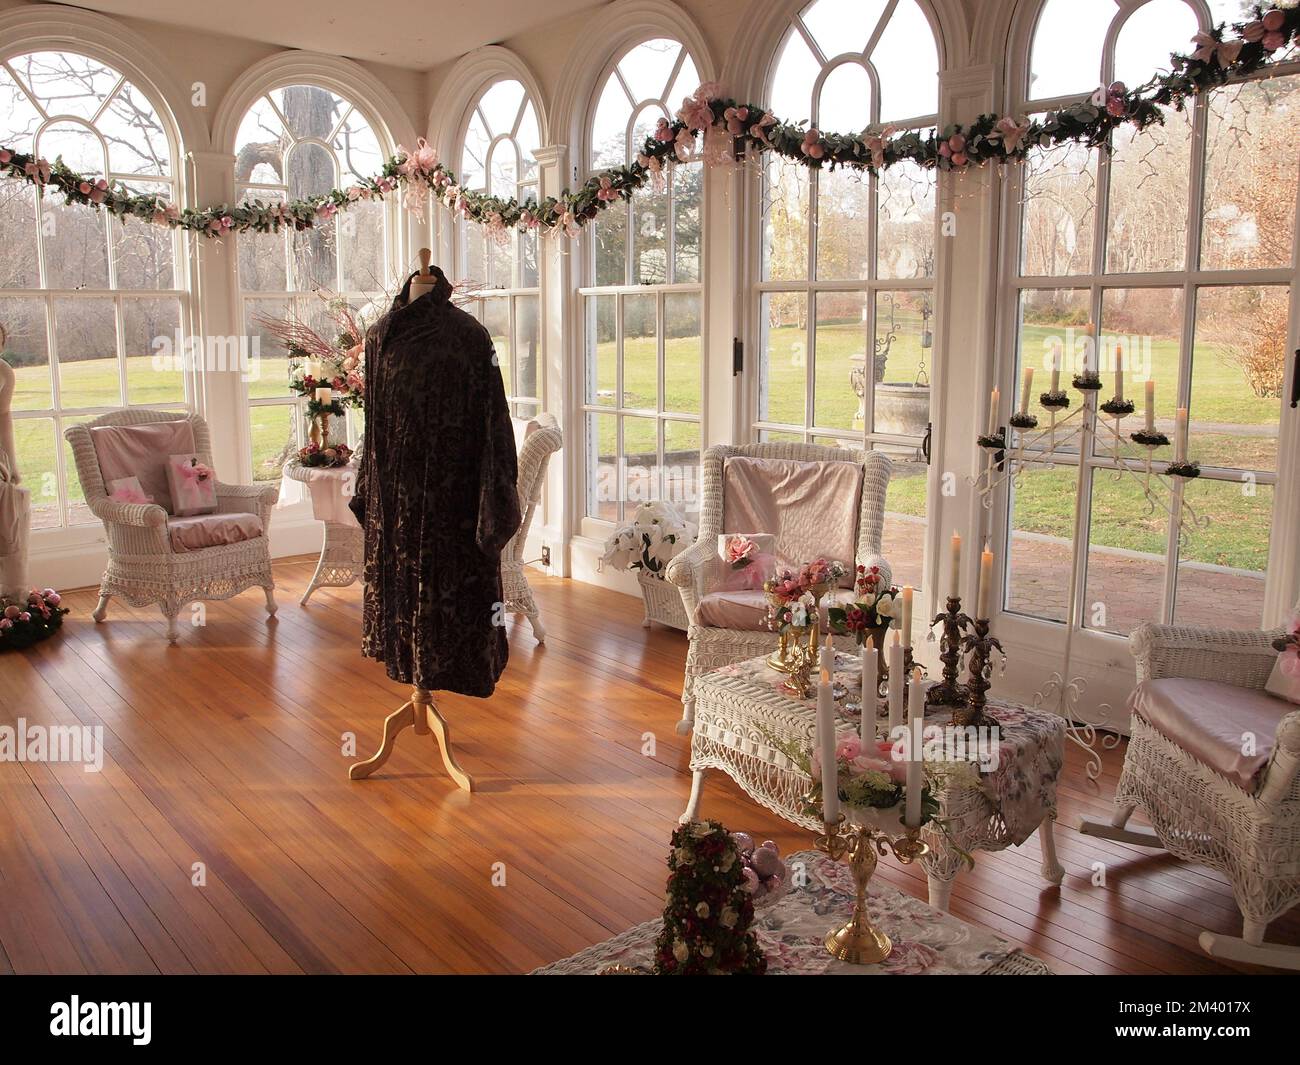 Ringwood Manor State Park in Ringwood New Jersey at the annual Victorian Christmas display showcasing the manor house and decorations. Stock Photo